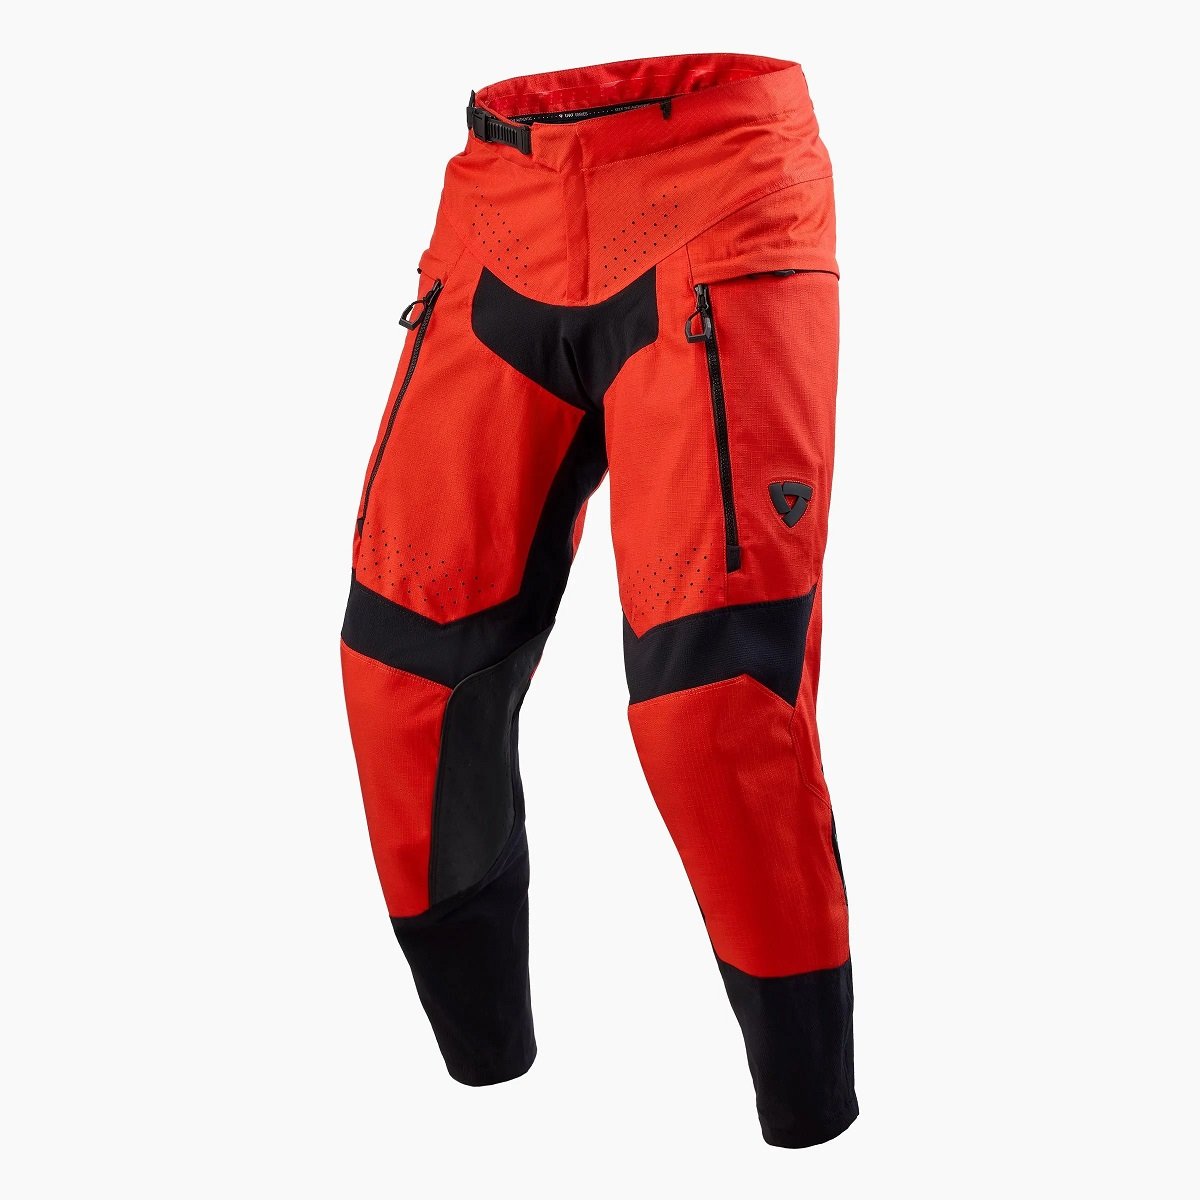 Image of REV'IT! Peninsula Trousers Red Motorcycle Pants Size S ID 8700001348980